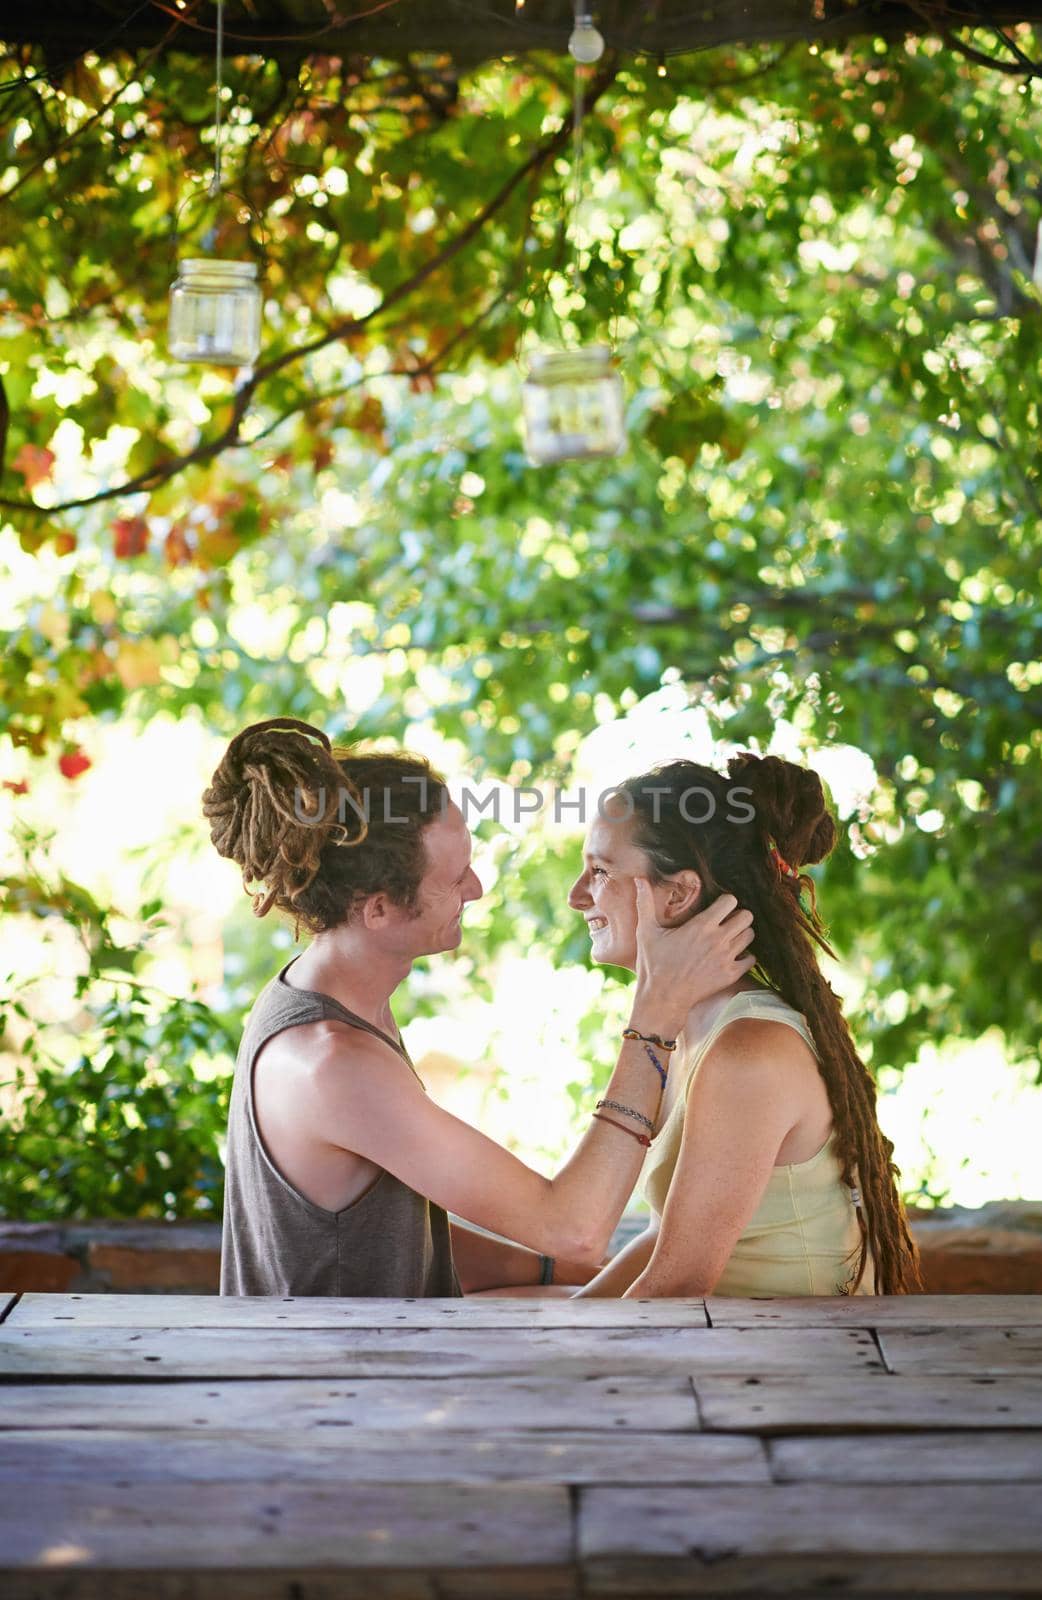 Their connection is undeniable. A cute young couple spending time together outdoors